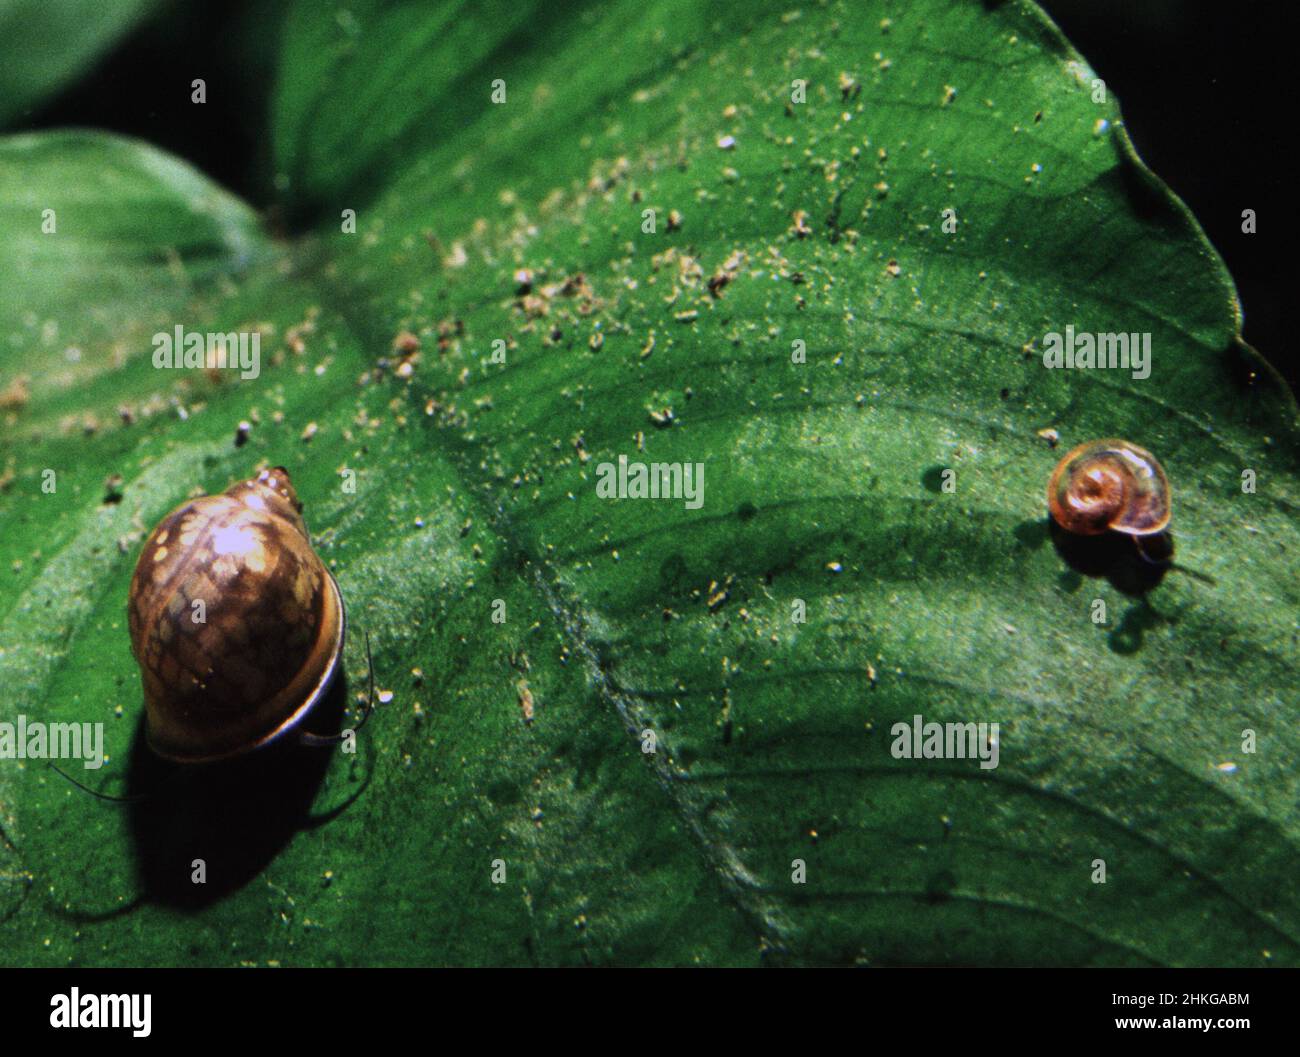 Freshwater snails (Physa sp. and Planorbis sp.) Stock Photo